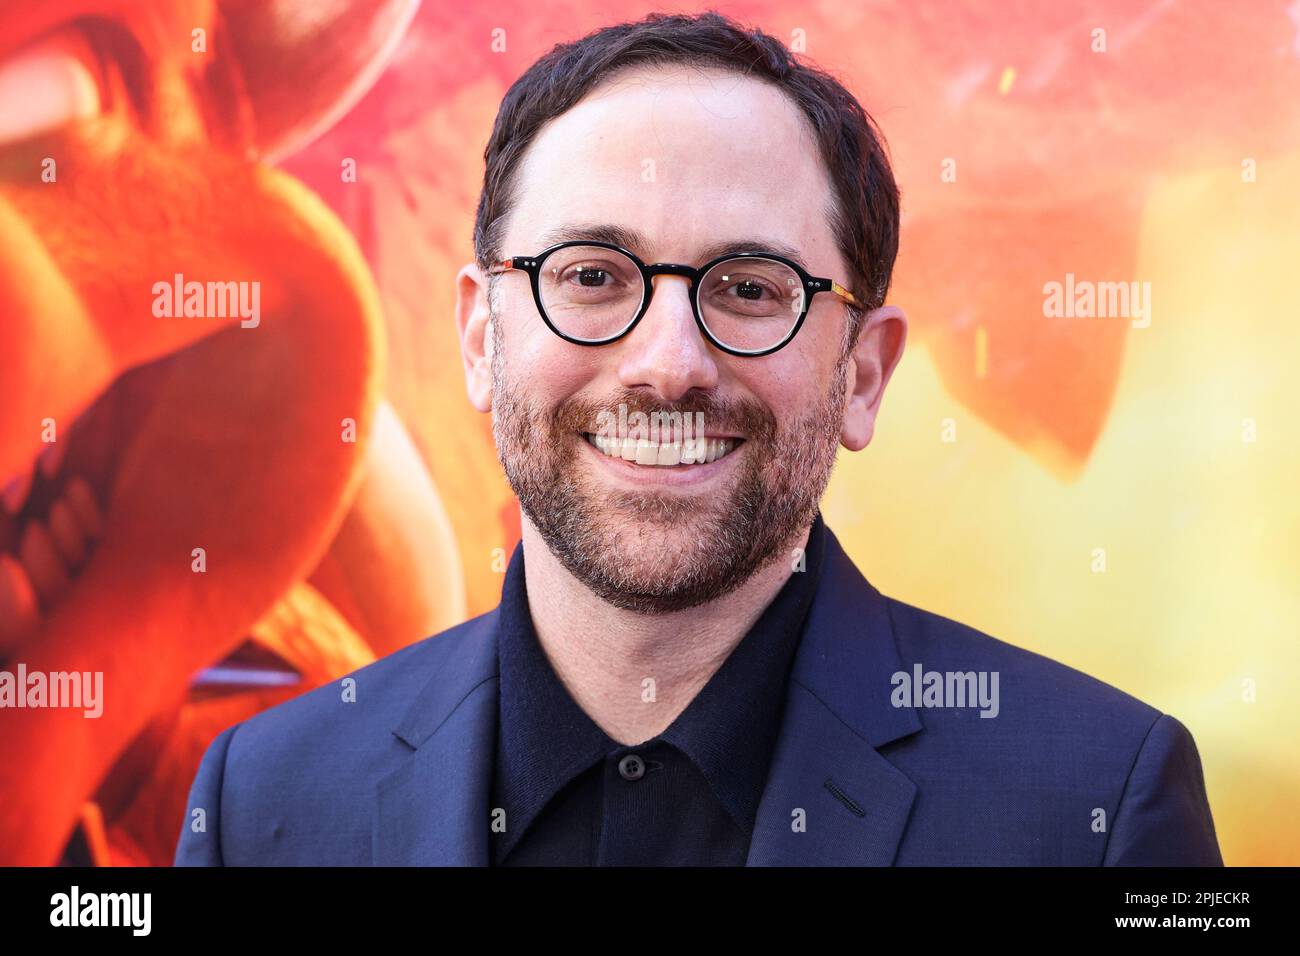 LOS ANGELES, CALIFORNIA, USA - APRIL 01: American screenwriter and producer Matthew Fogel arrives at the Los Angeles Special Screening Of Universal Pictures, Nintendo And Illumination Entertainment's 'The Super Mario Bros. Movie' held at the Regal Cinemas LA Live & 4DX Movie on April 1, 2023 in Los Angeles, California, United States. (Photo by Xavier Collin/Image Press Agency) Stock Photo